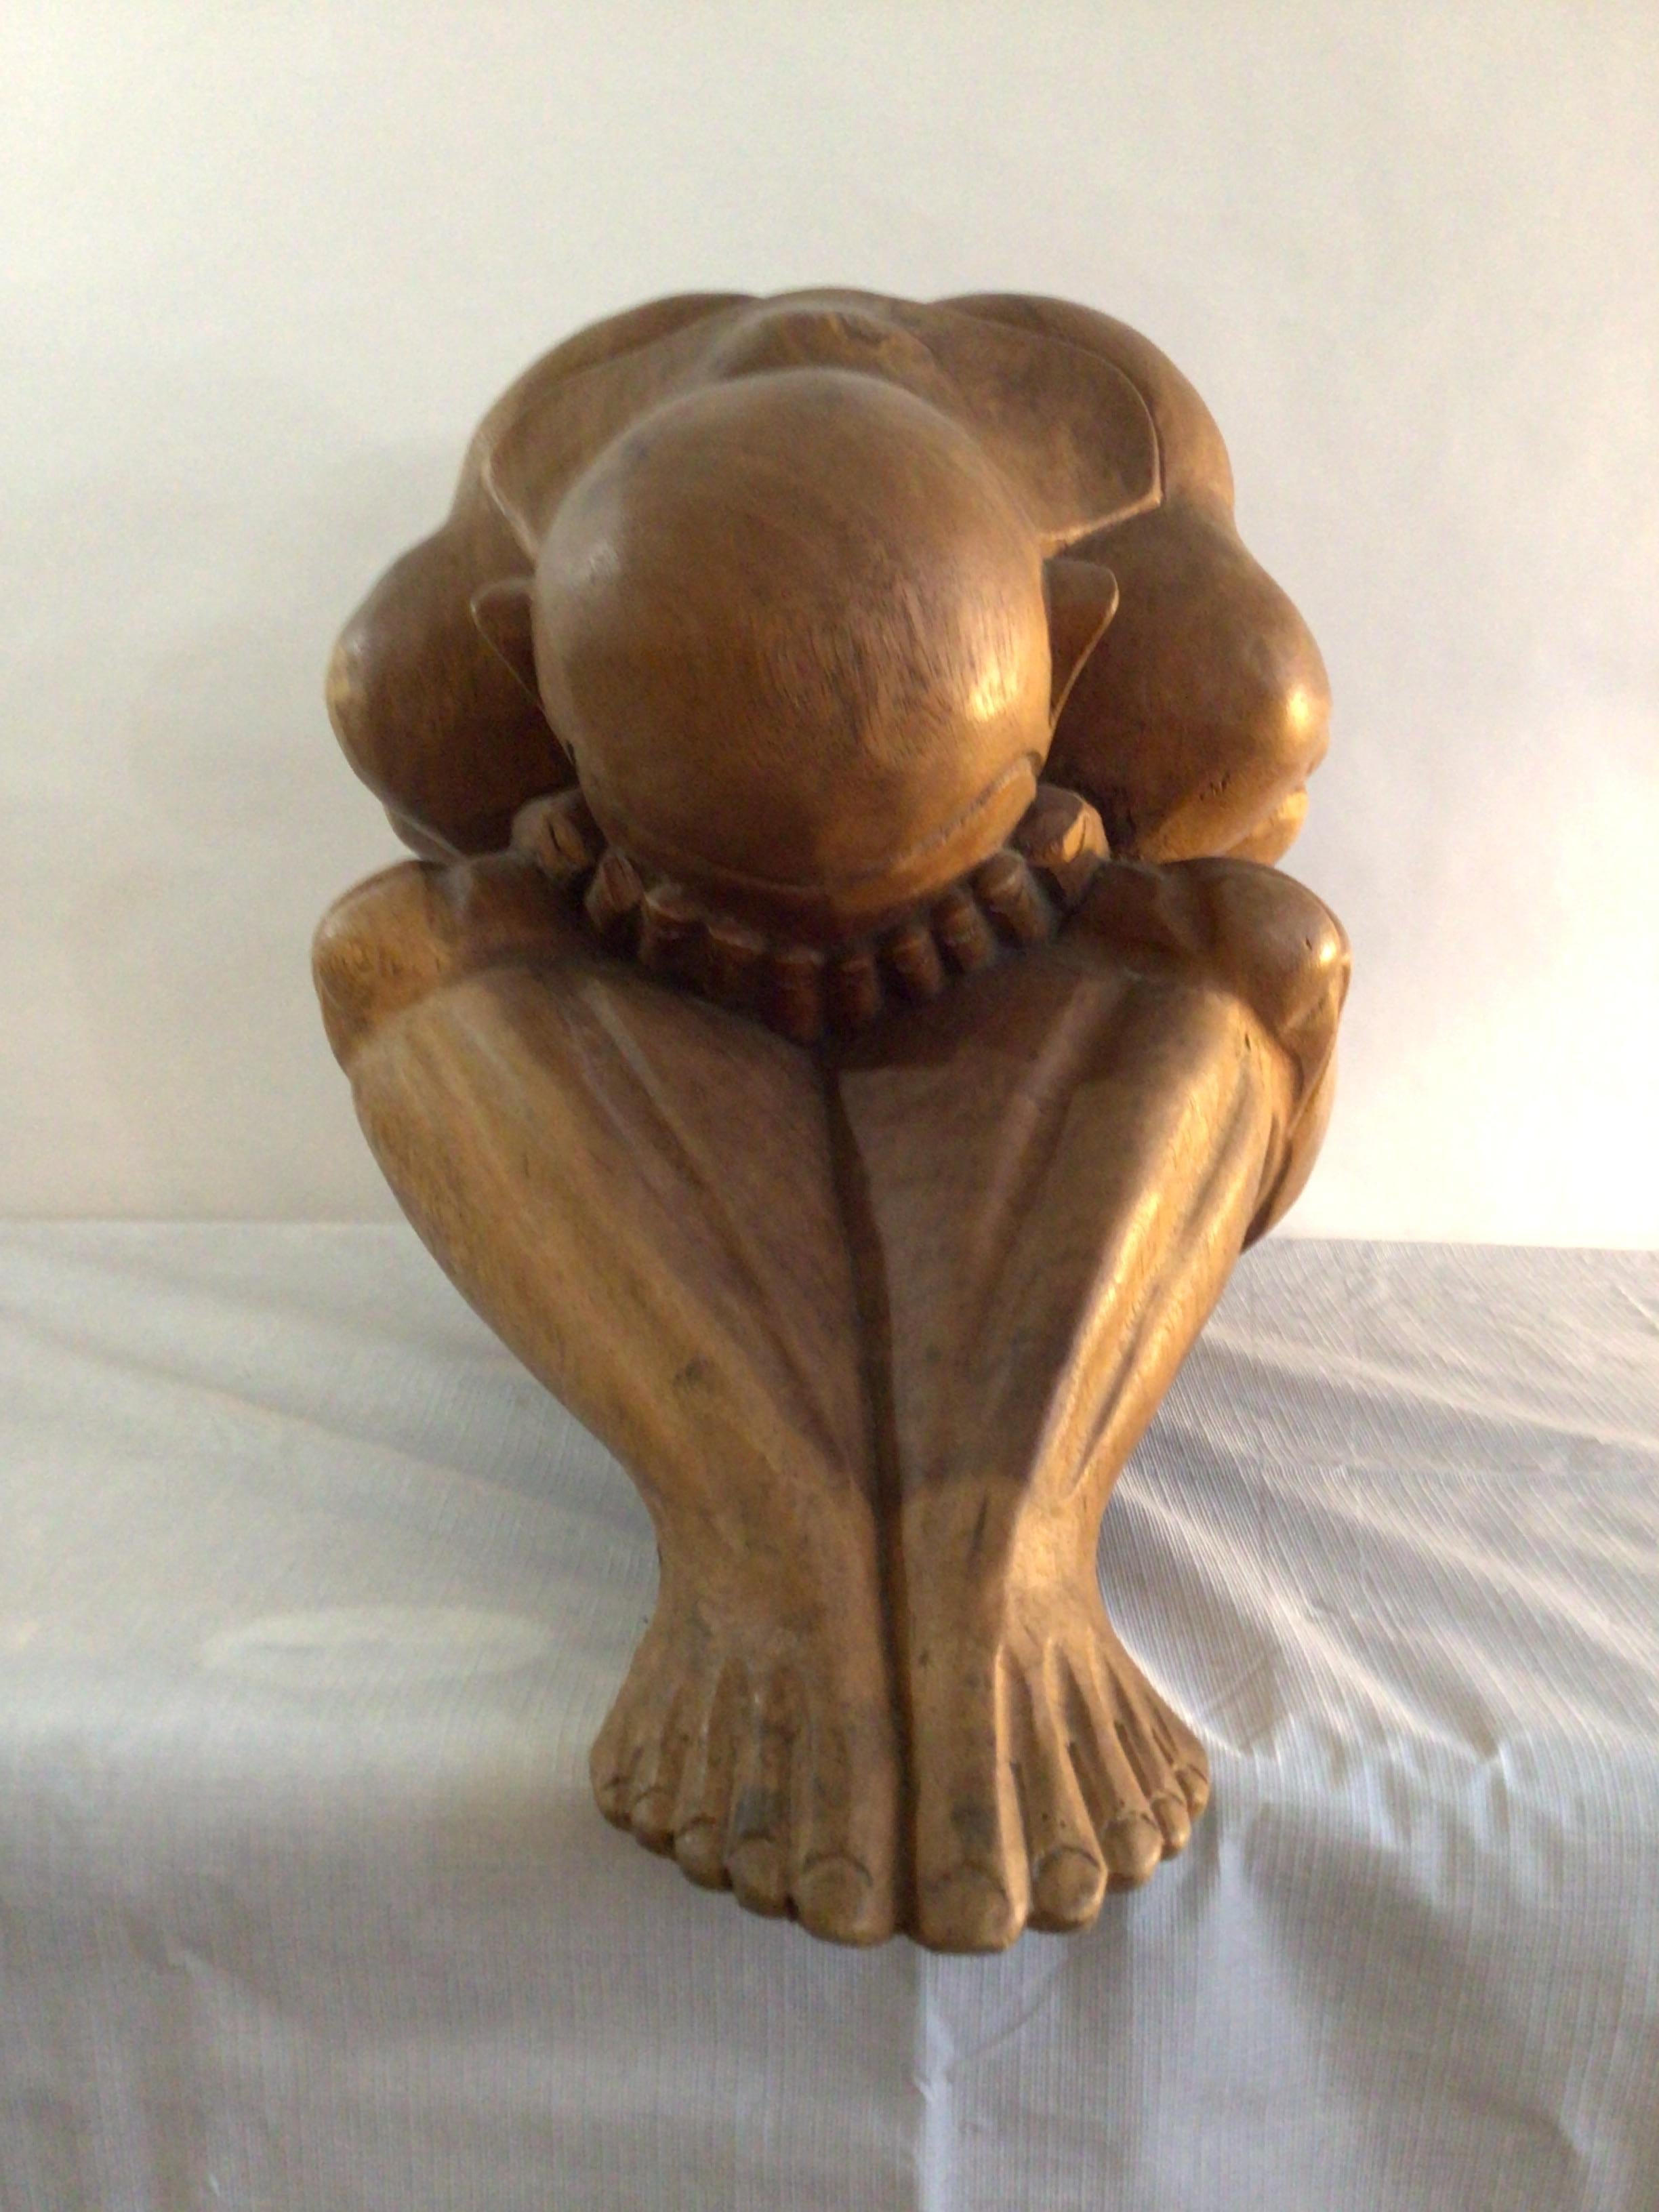 1960s Large Hand-Carved Wood Sculpture of Man Praying / Weeping Buddha
Abstract Yoga
Wrestler
There is a story about two warriors associated with the weeping Buddha. The warriors would face each other during battle wearing masks. Their masks